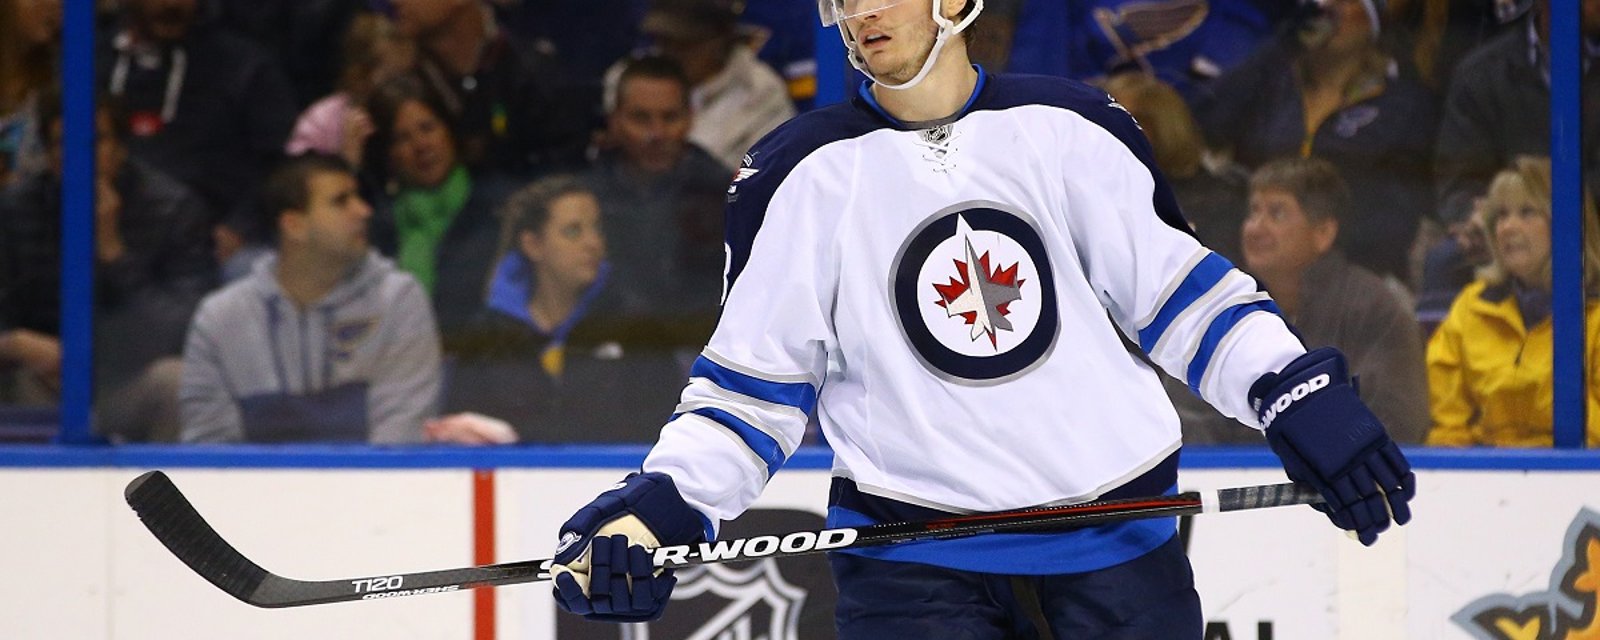 Breaking: NHL suspends Jacob Trouba for illegal hit to the head.